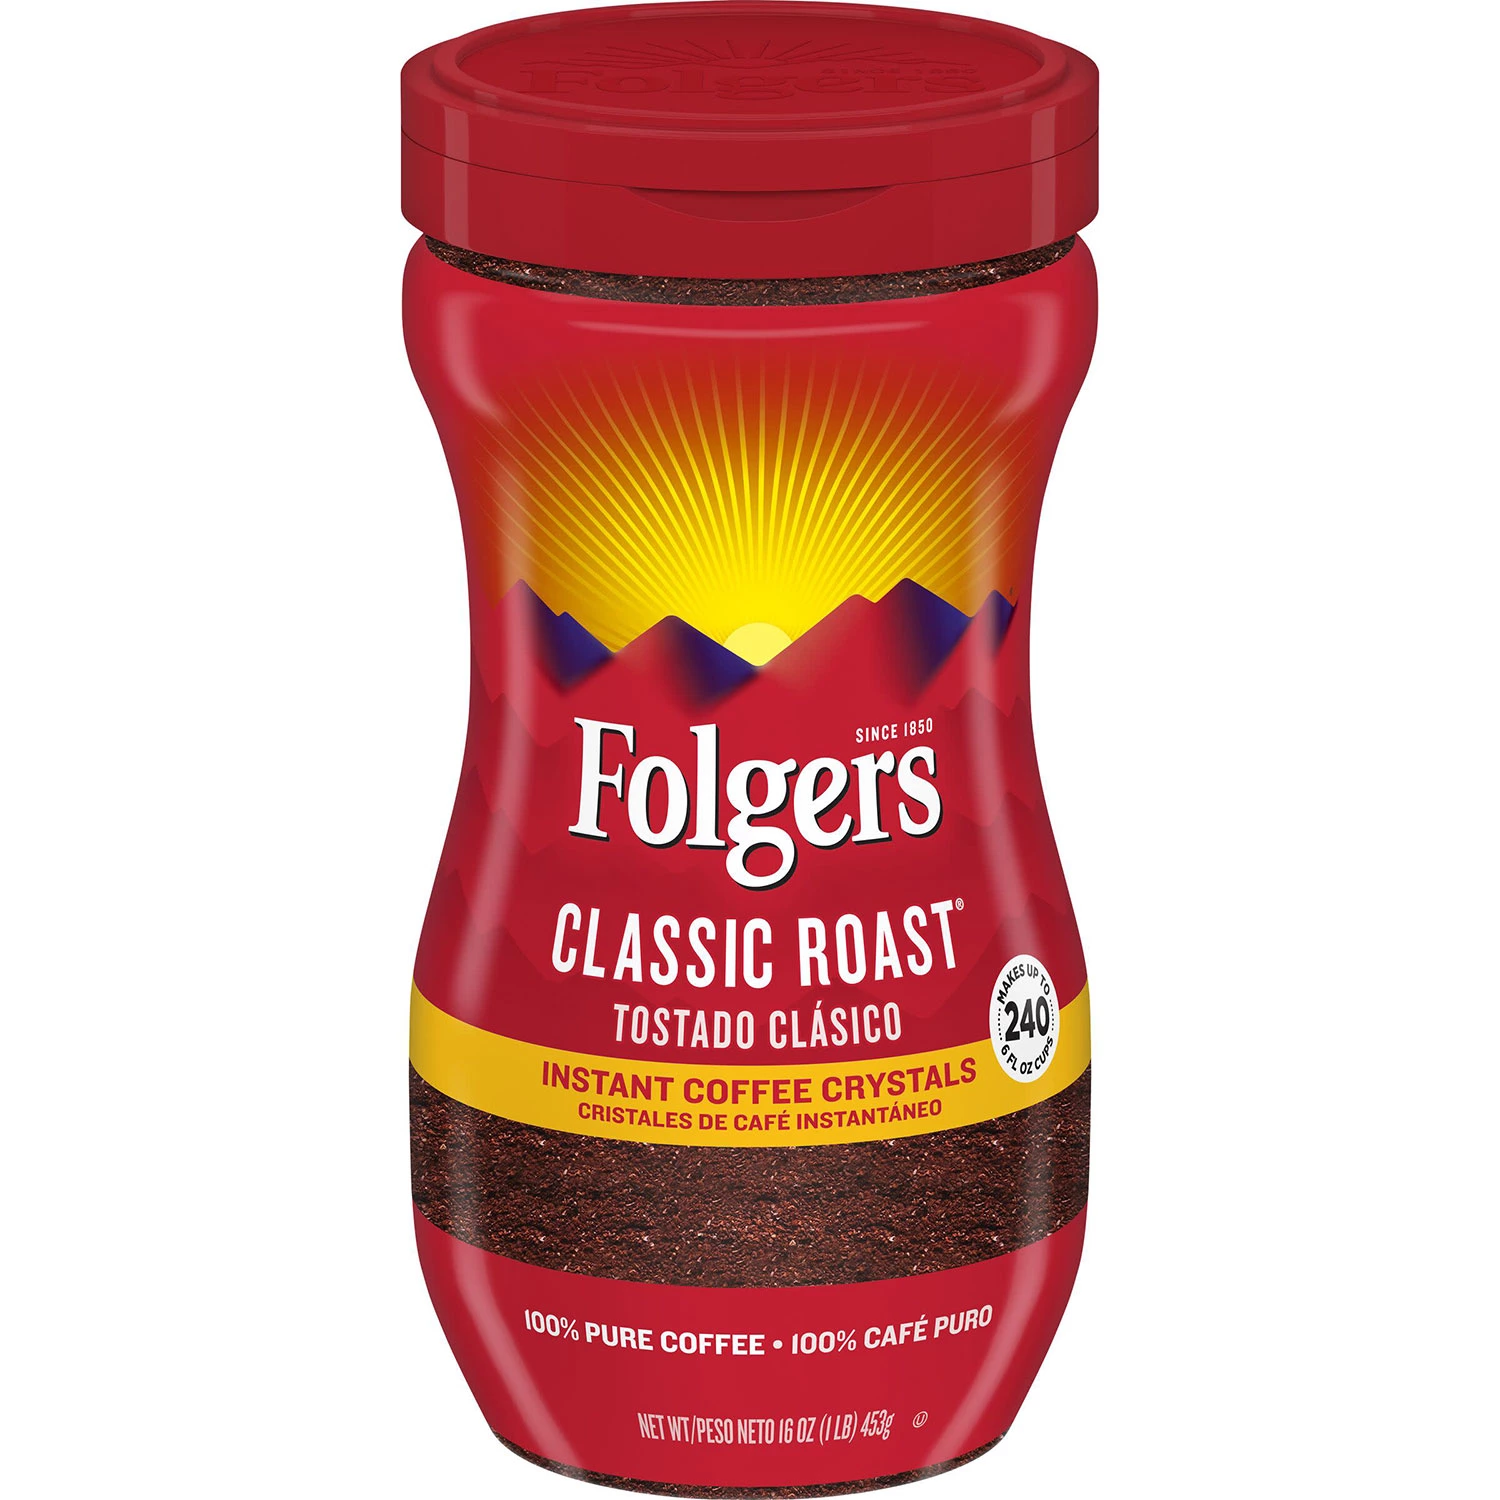 Folgers Classic Roast Instant Coffee Crystals (16 oz.)